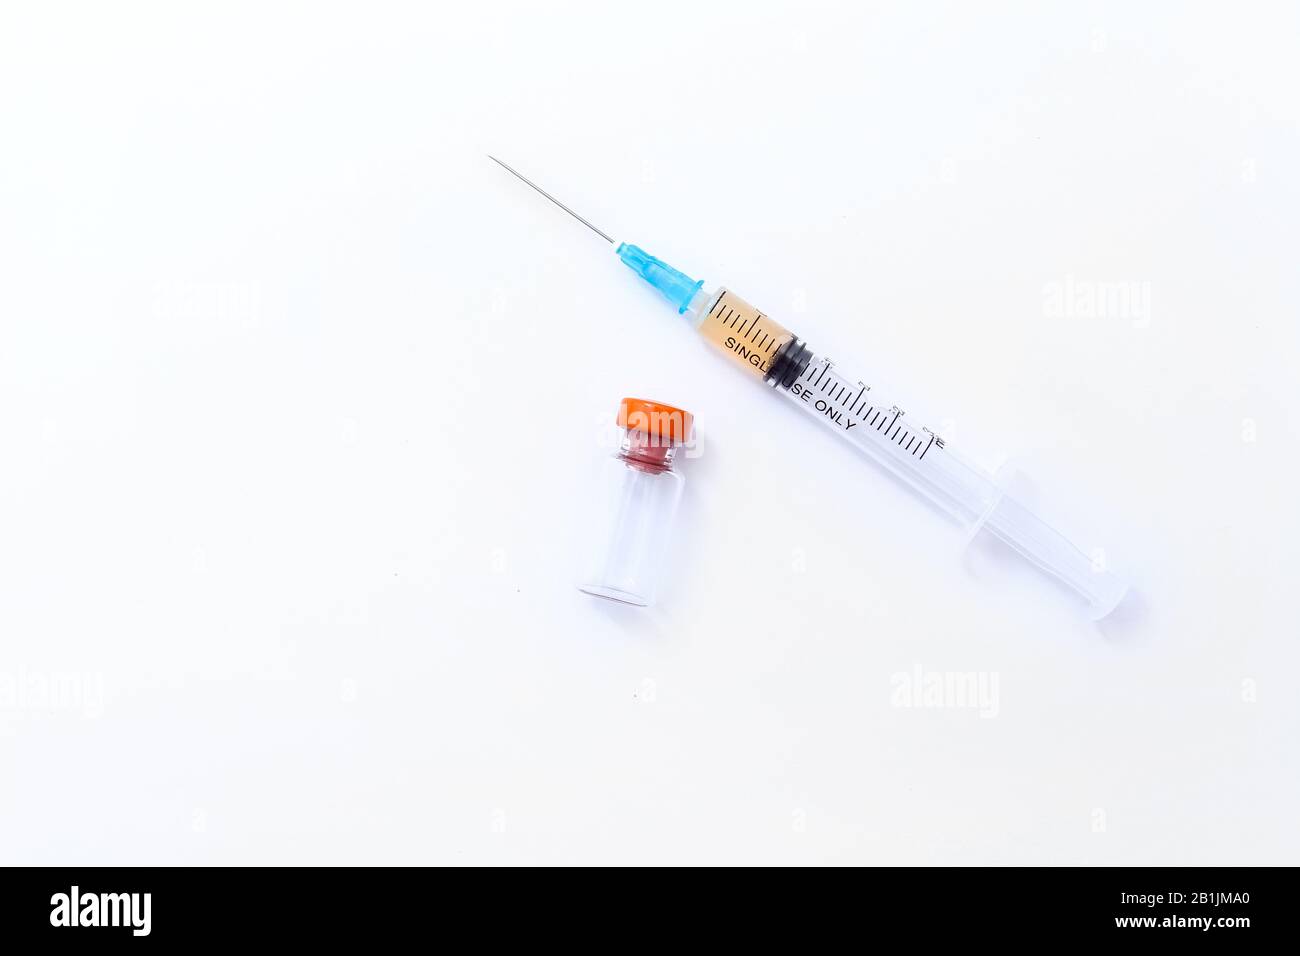 Disposable syringe and vial of medicine on a white background. Vaccination session,flu season med concept. Stock Photo